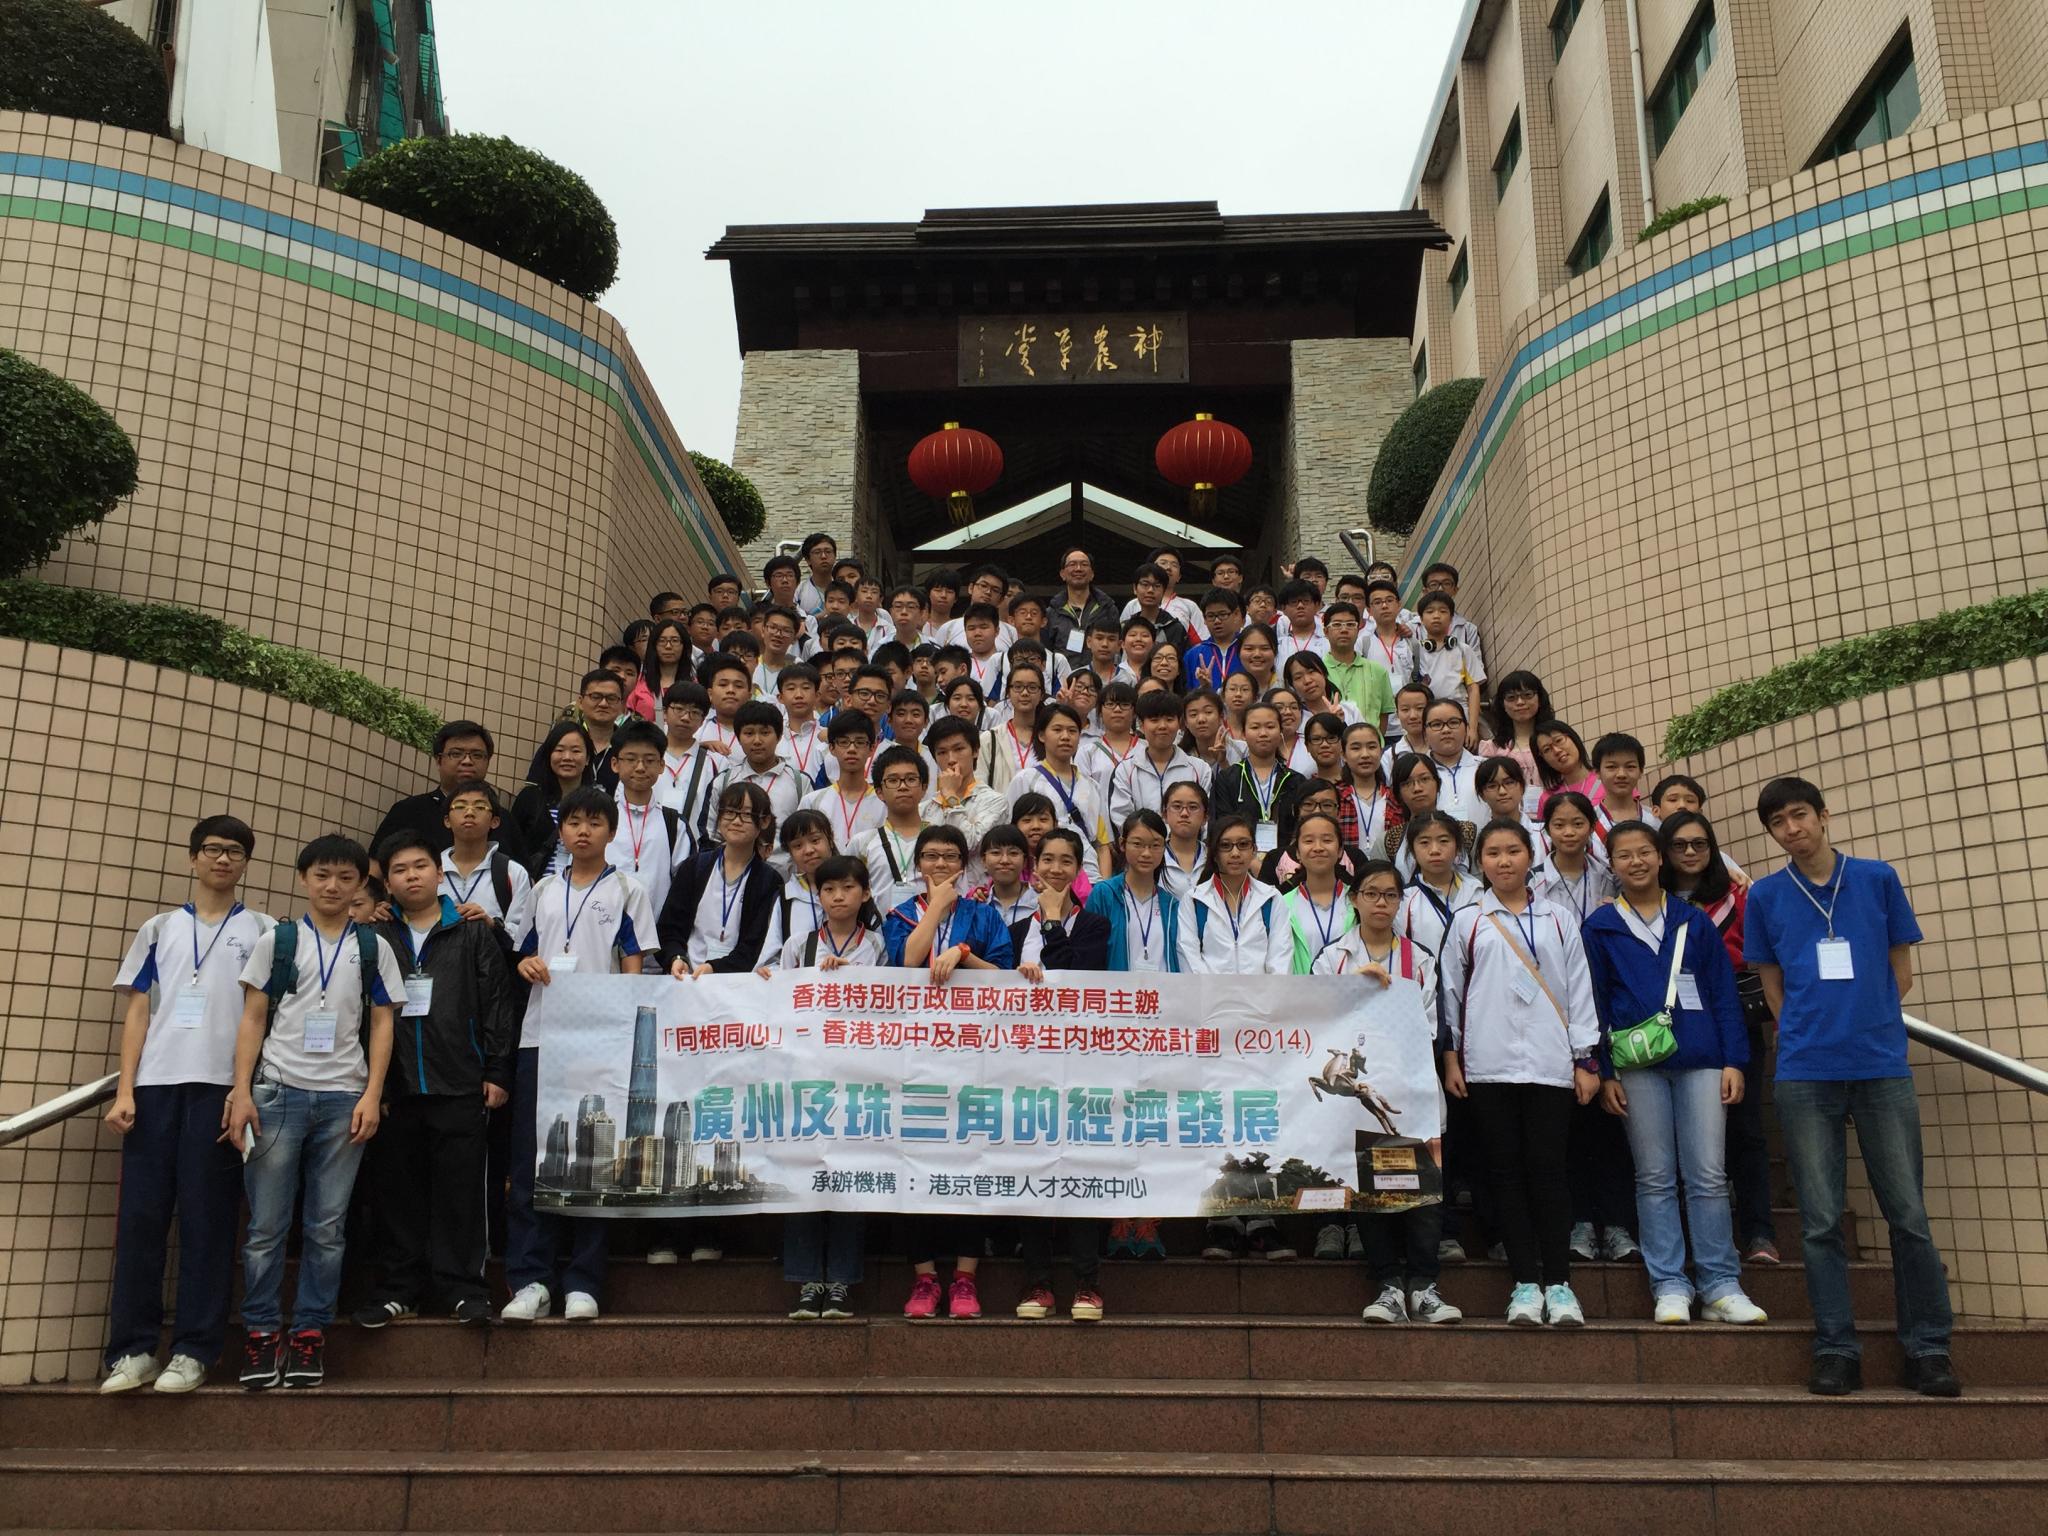 Students and teachers take a photo in front of a Chinese herbal garden.